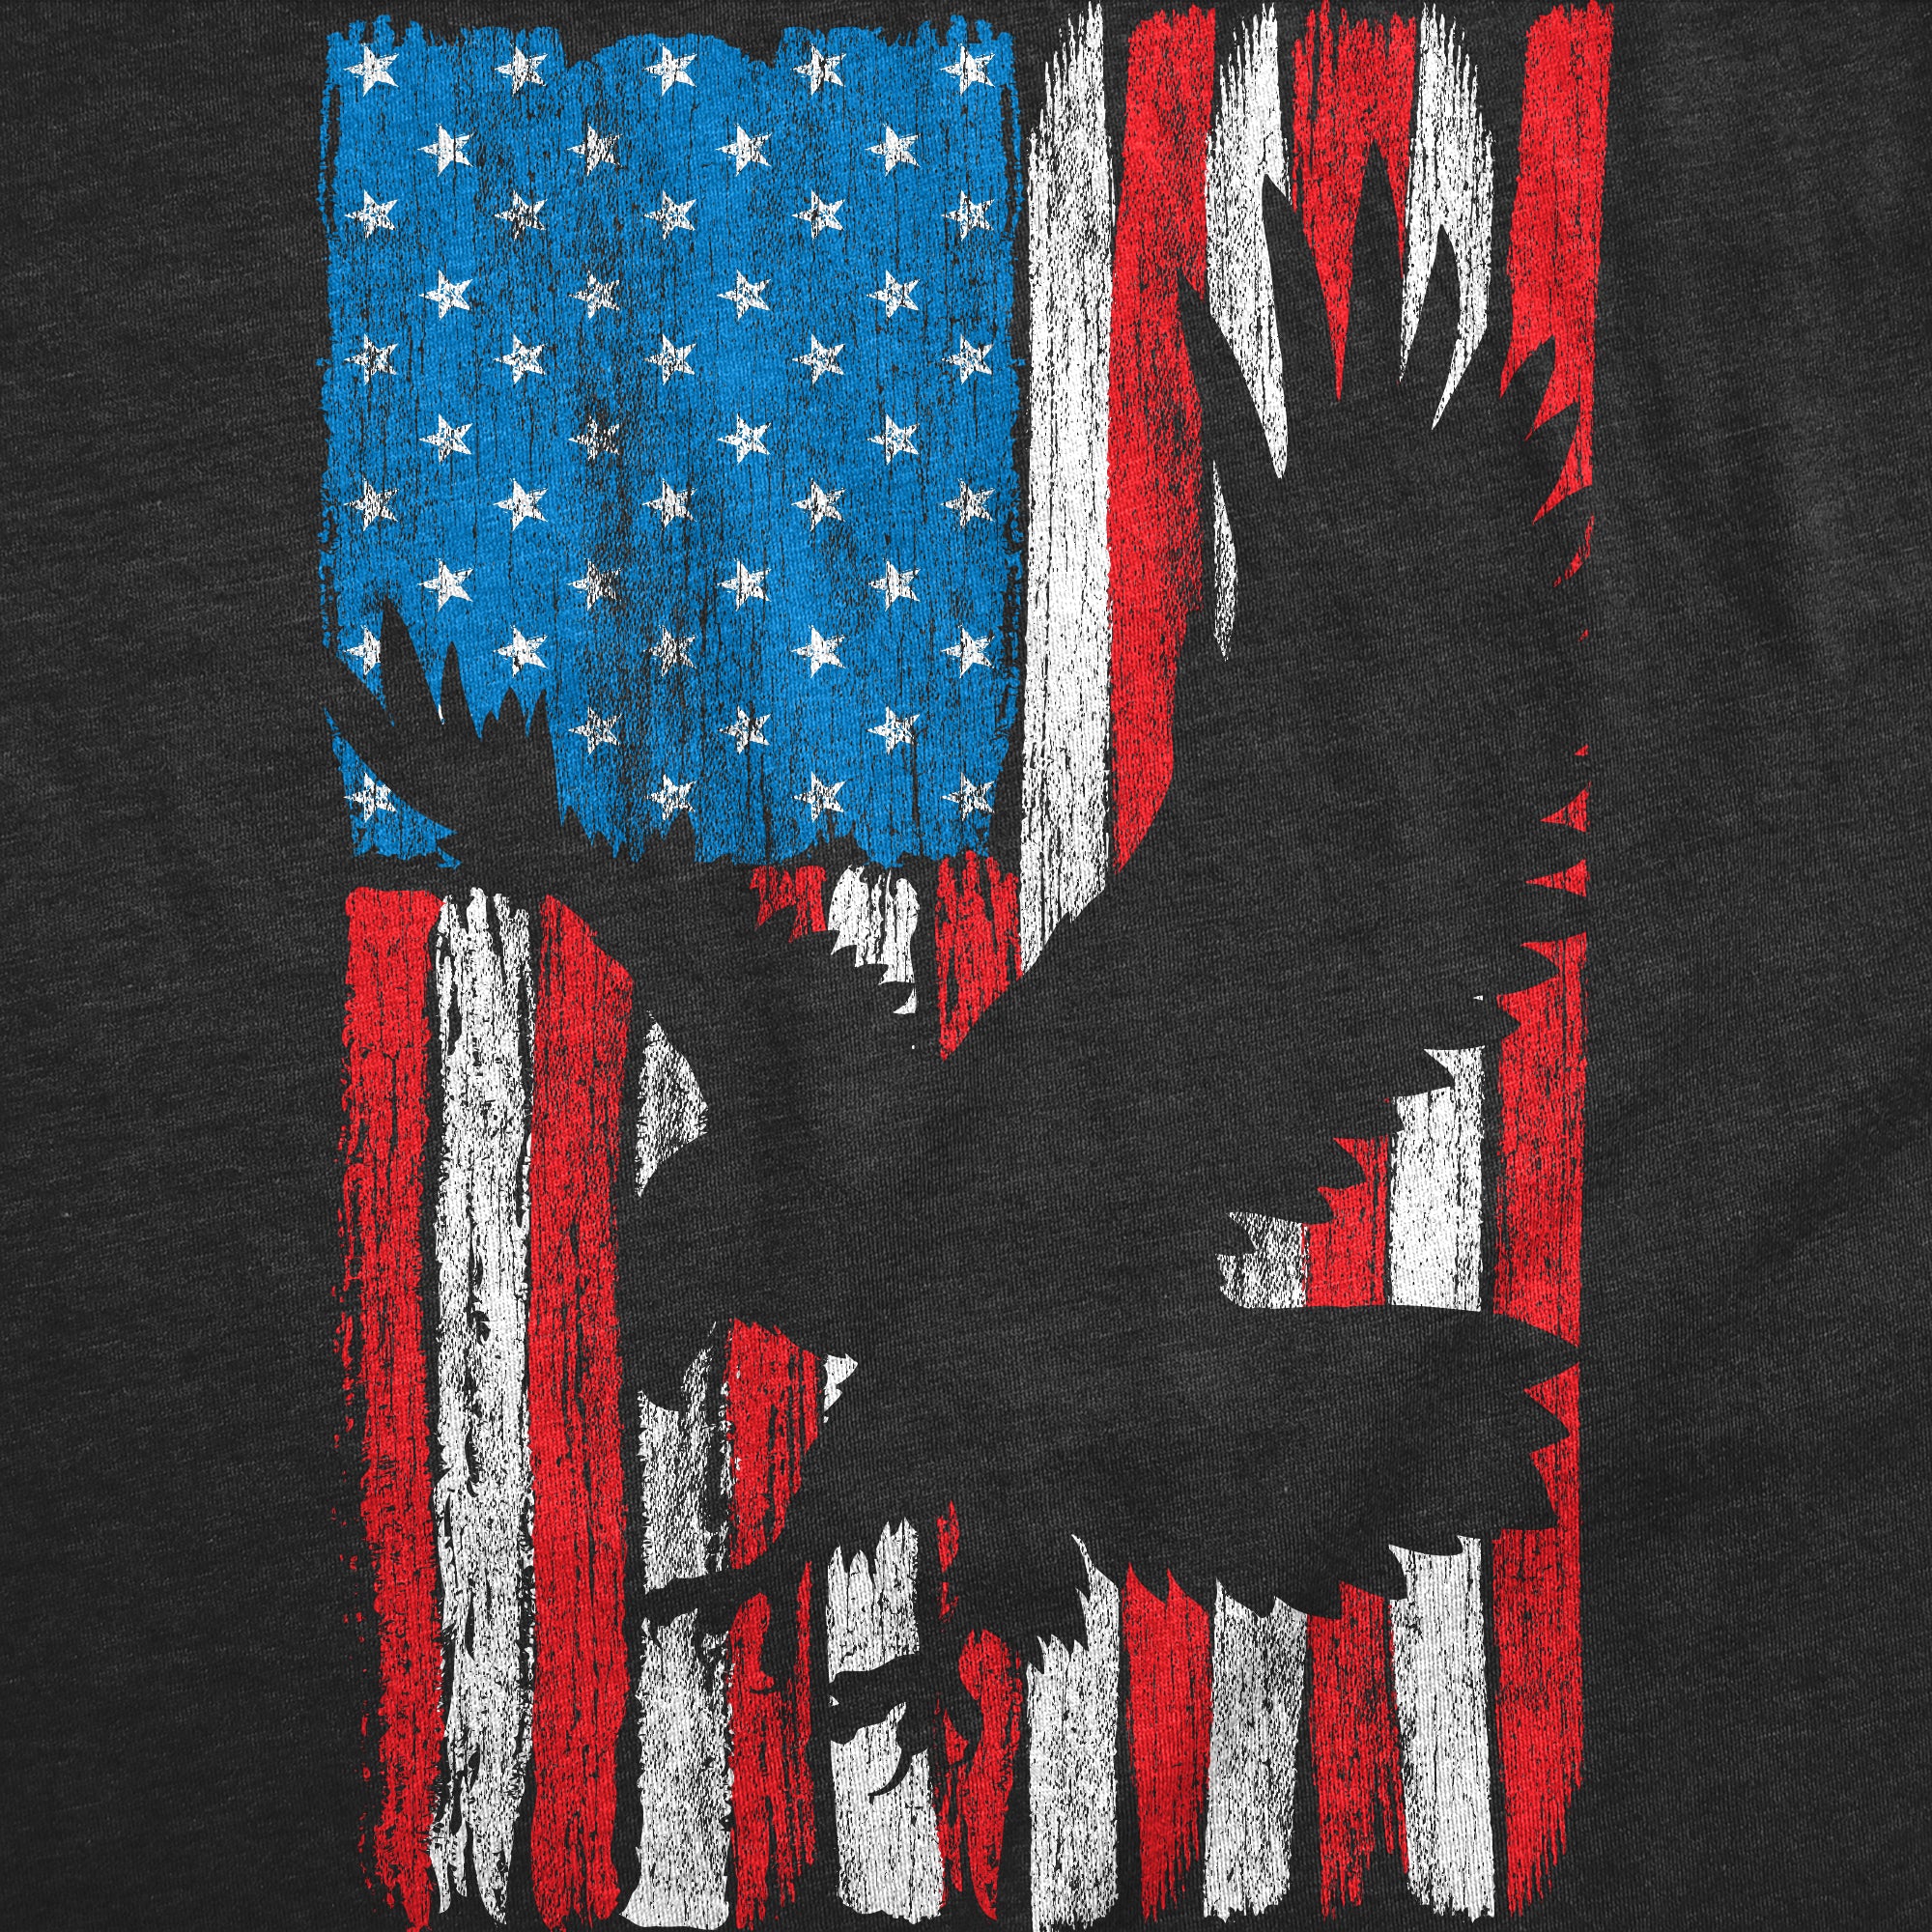 Funny Heather Black - Eagle In Flag Eagle In Flag Mens T Shirt Nerdy Fourth Of July Tee